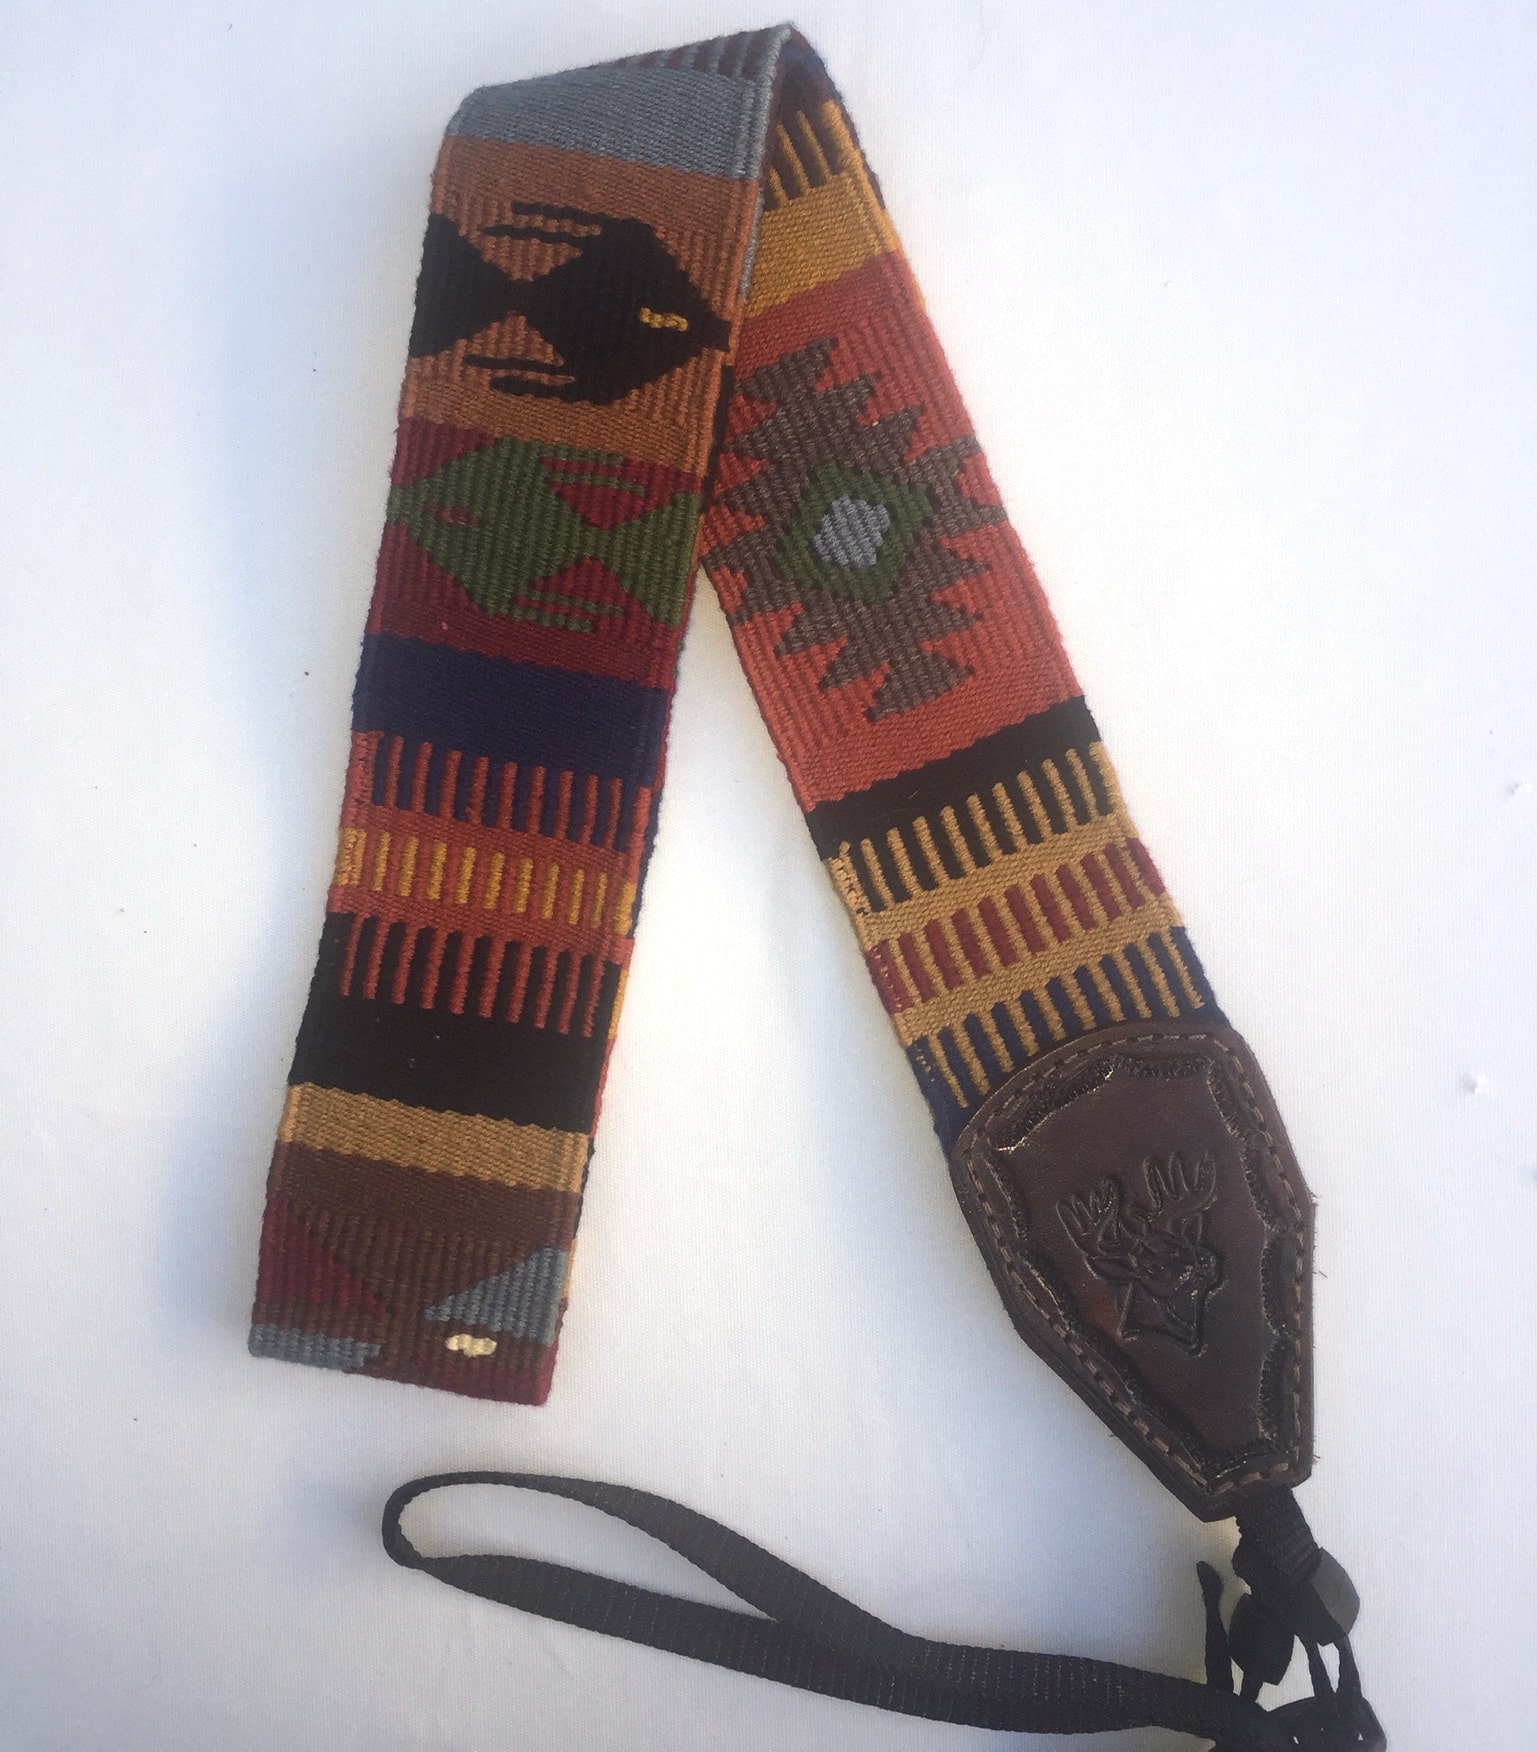 Handwoven Cotton and Leather Camera Strap - Earth Tones with Fish, Butterfly and Geometric Diamond Patterns